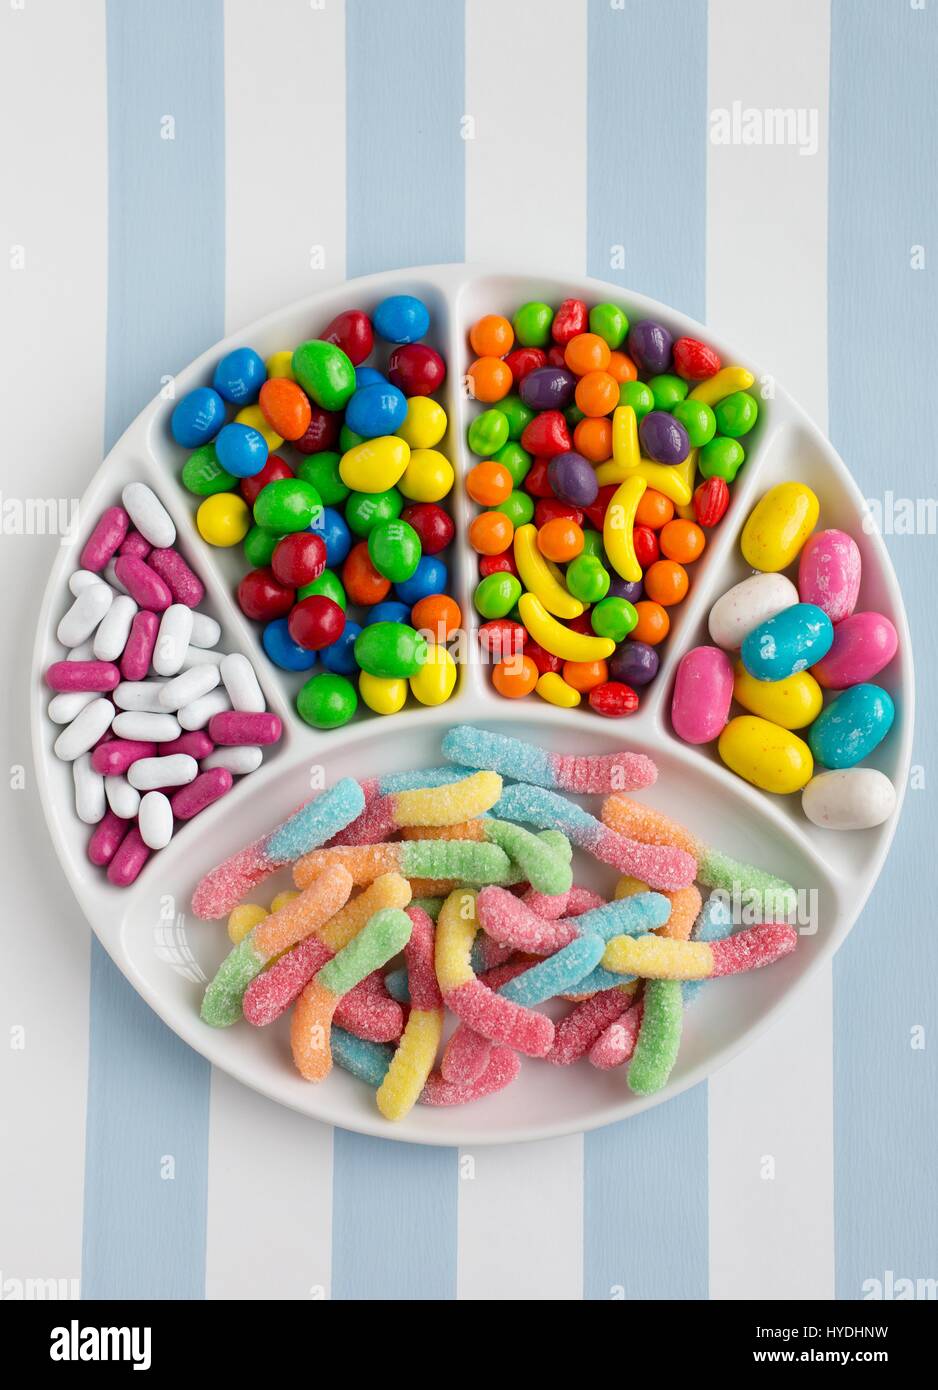 Different varieties of candy on a plate. Stock Photo